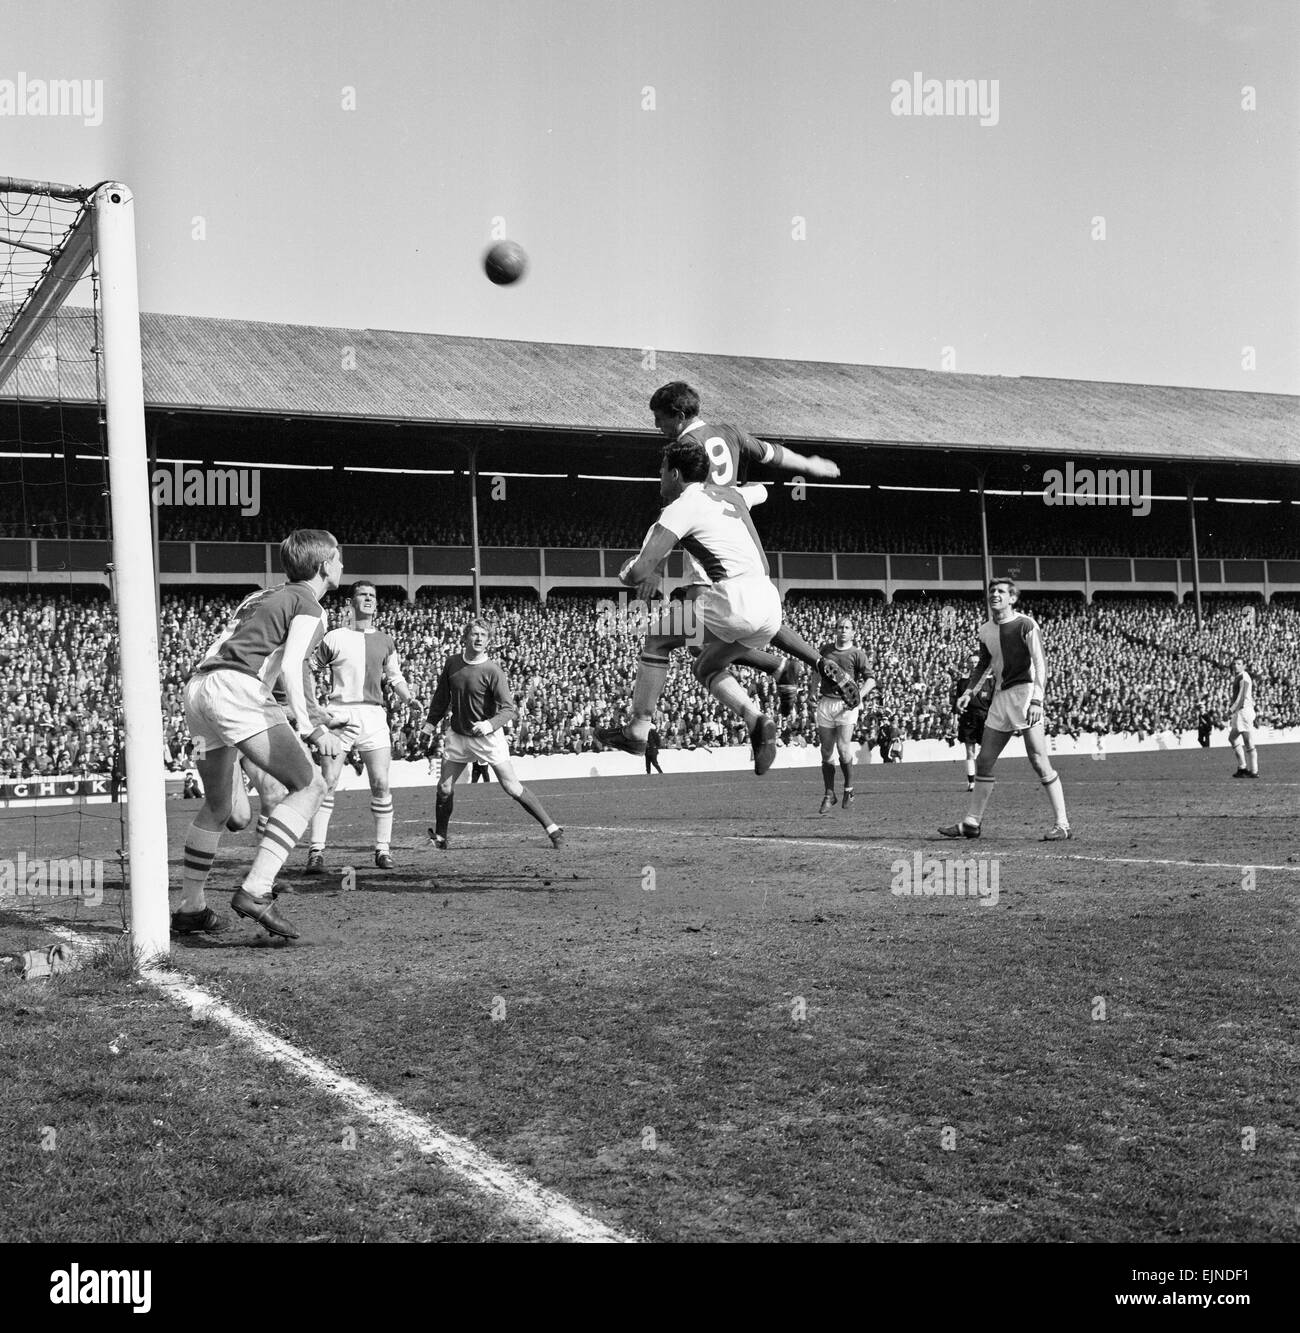 Blackburn Rovers v Manchester United, league match at Ewood Park, Saturday 3rd April 1965. Herd tries a header, closely tackled by England, ball goes over bar. Wilson on goal line. Clayton and Denis Law watch. Final Score: Blackburn Rovers 0-5 Manchester United Stock Photo